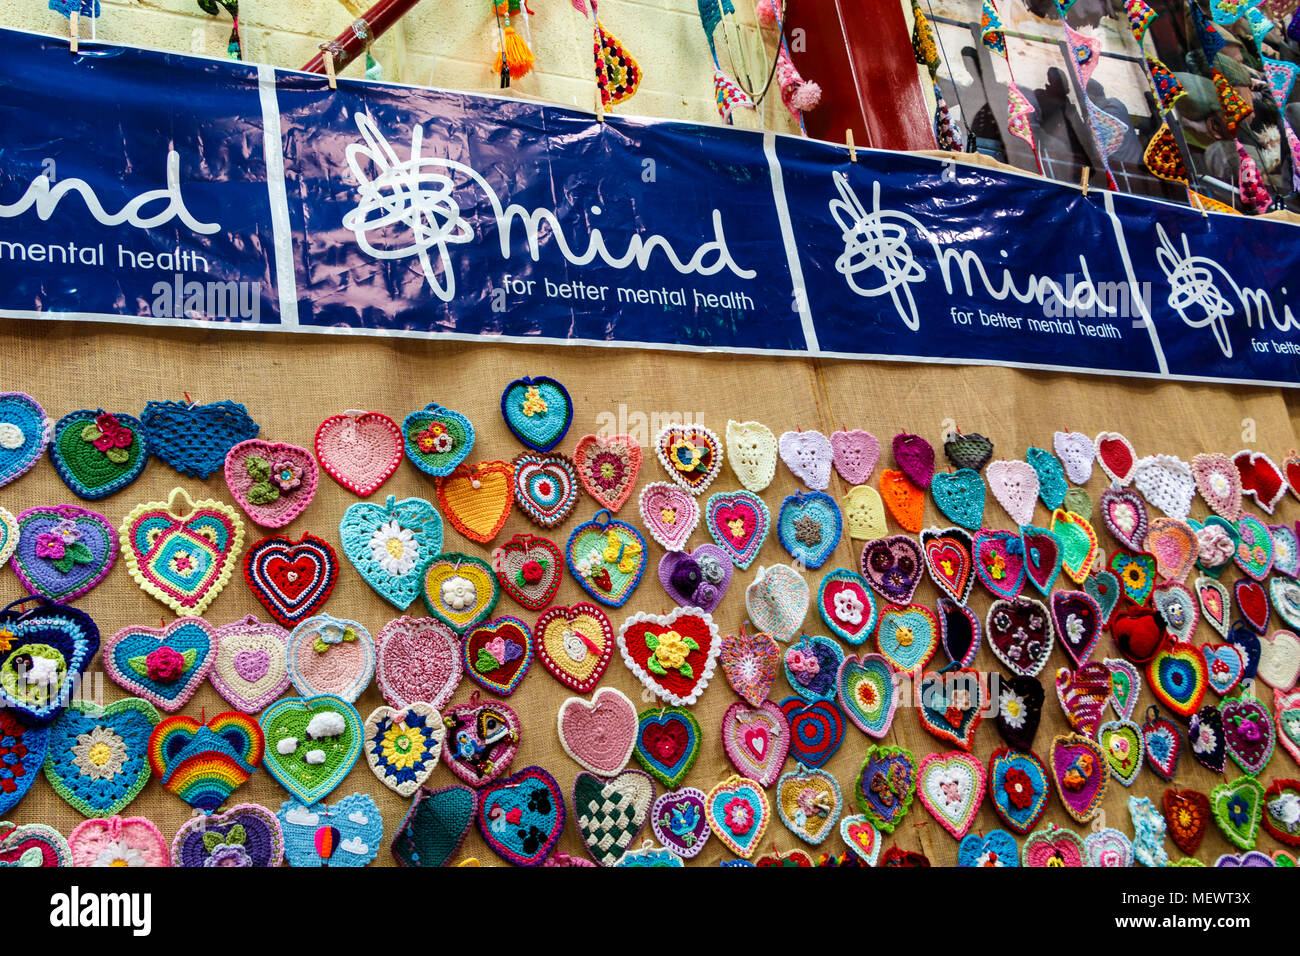 The mental health charity Mind with their display of knitted love hearts at Yarndale, Skipton, North Yorkshire, UK. Stock Photo